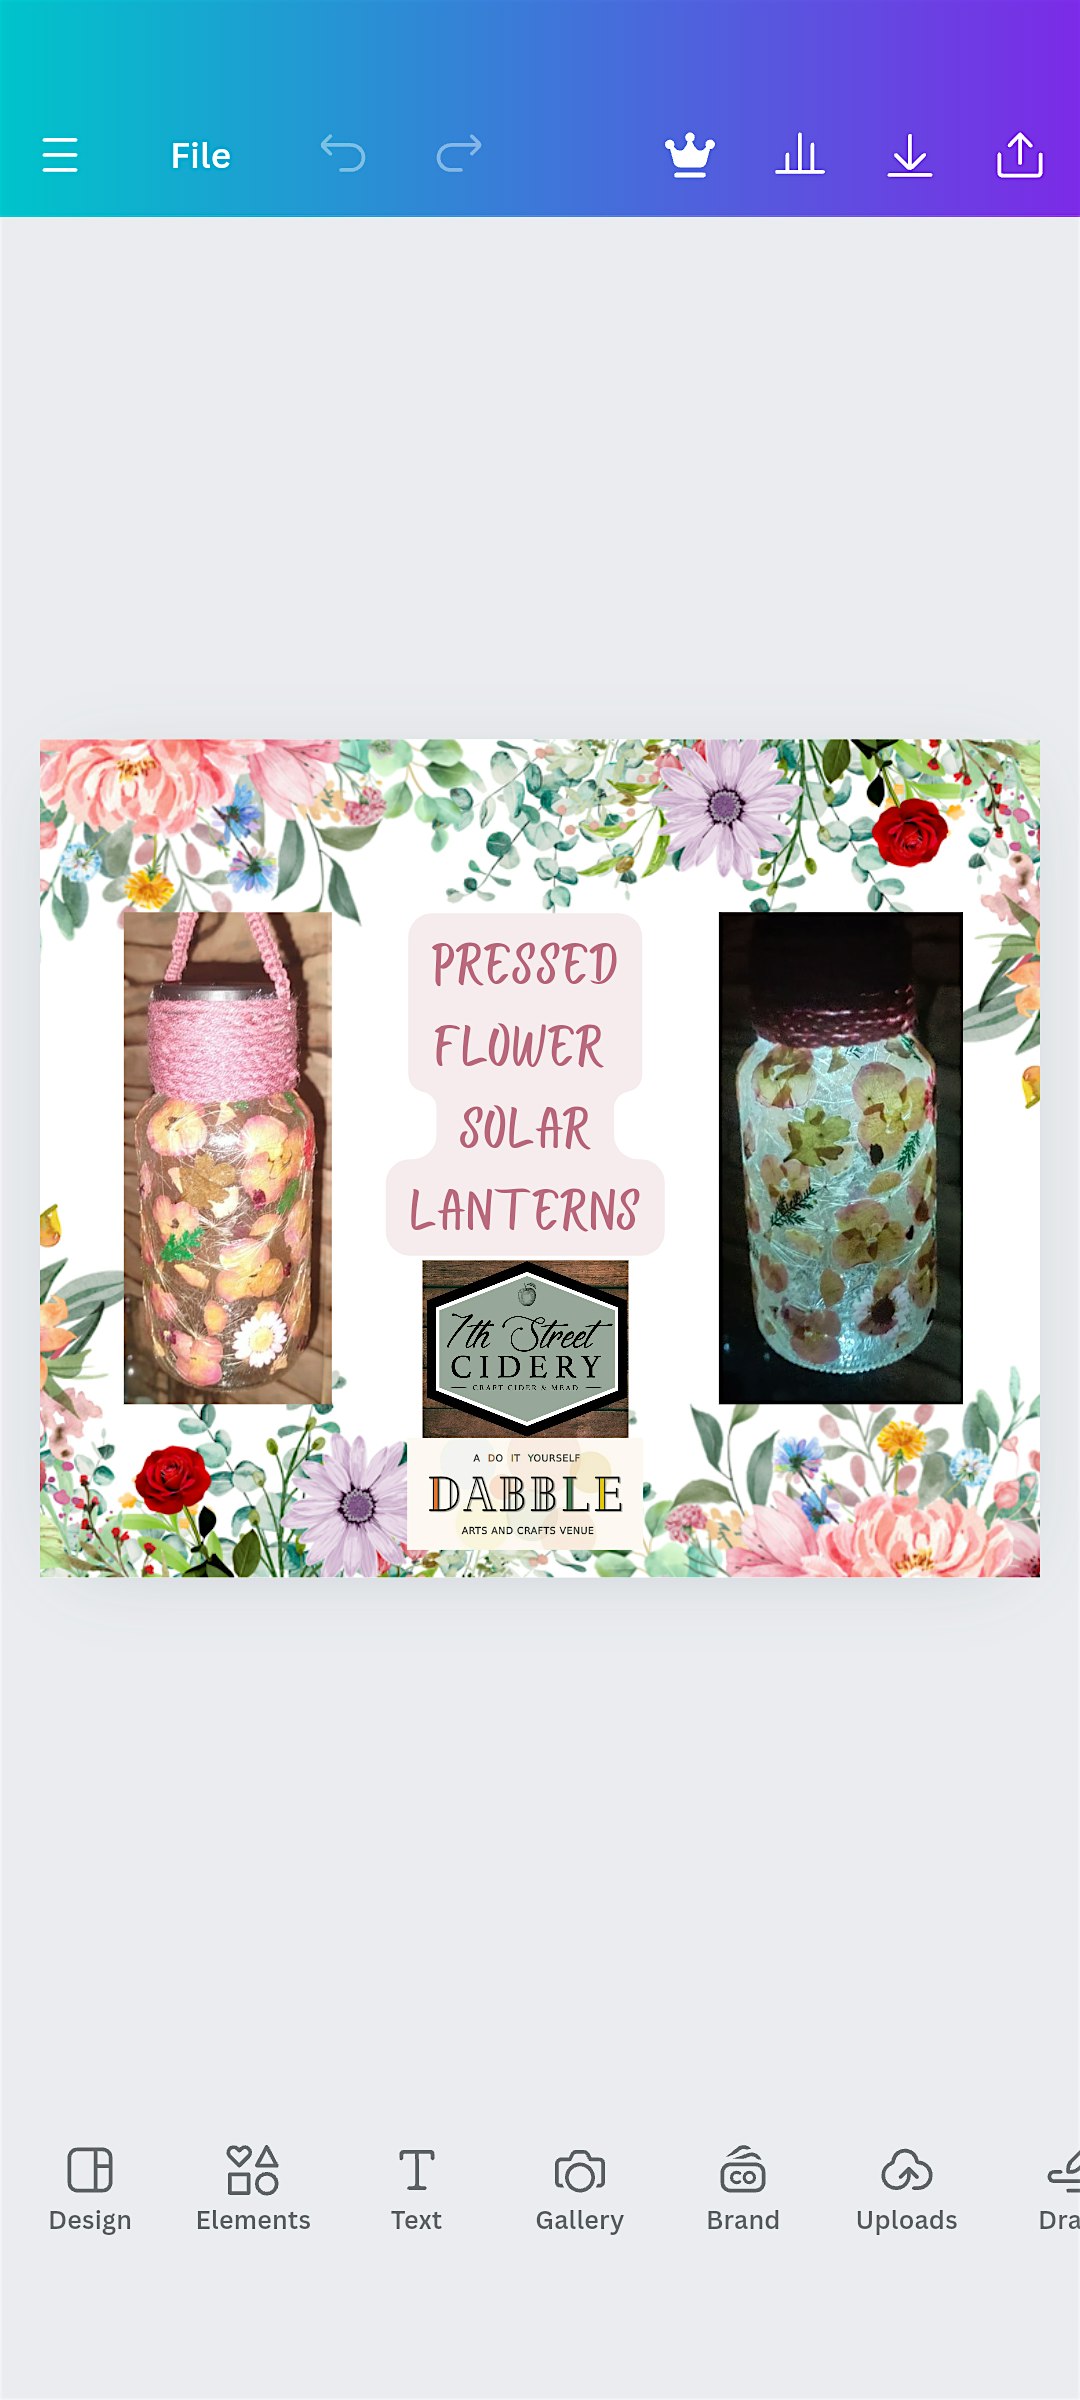 7th Street Cidery presents pressed flower solar lanterns with Dabble